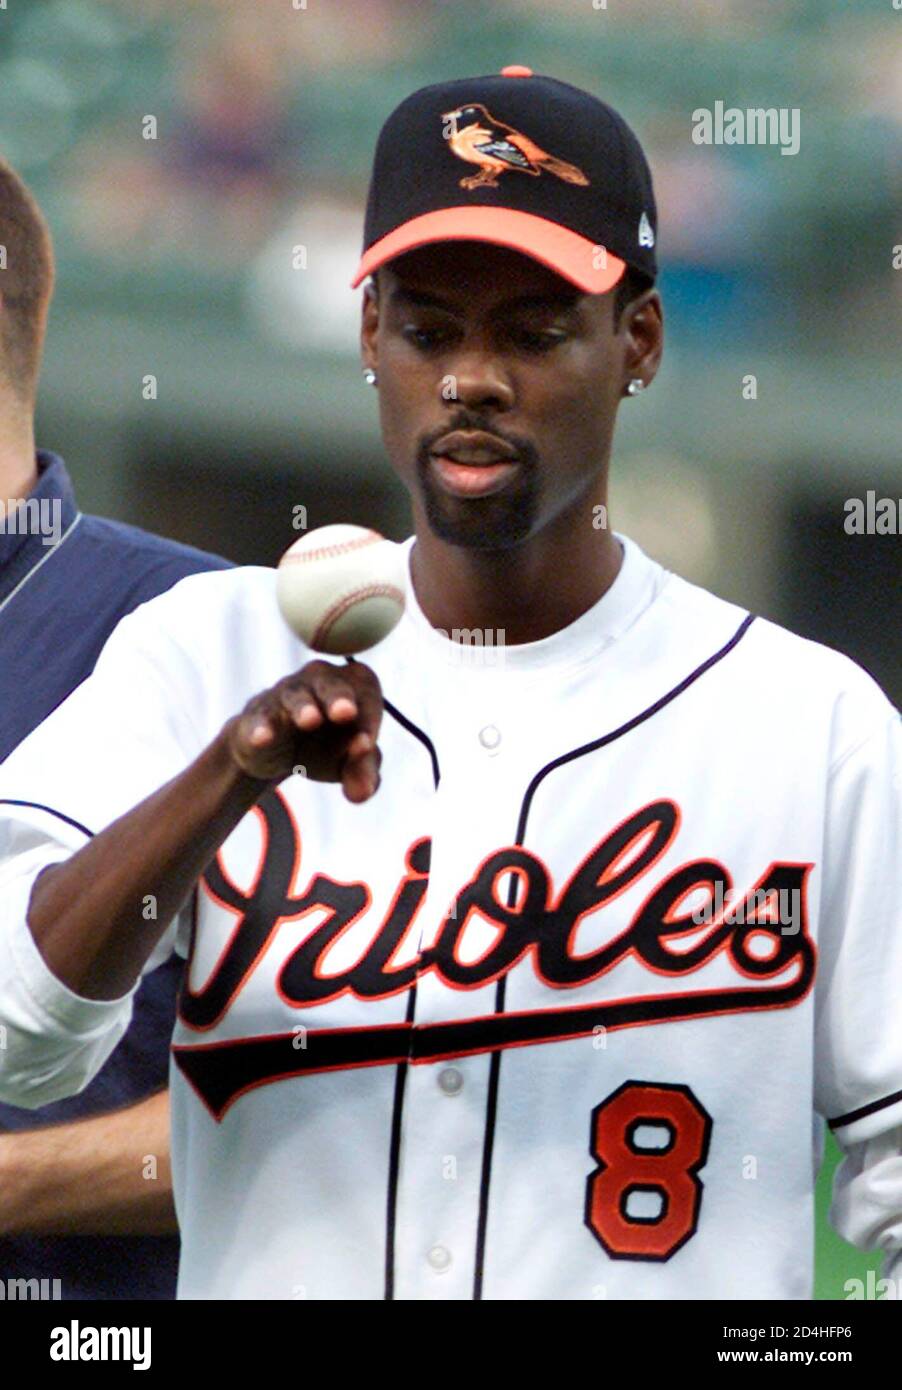 Entertainer/comedian Chris Rock flips a baseball while filming a scene from  his upcoming movie "Head of State" prior to the Baltimore Orioles' game  against the Toronto Blue Jays at Camden Yards, August